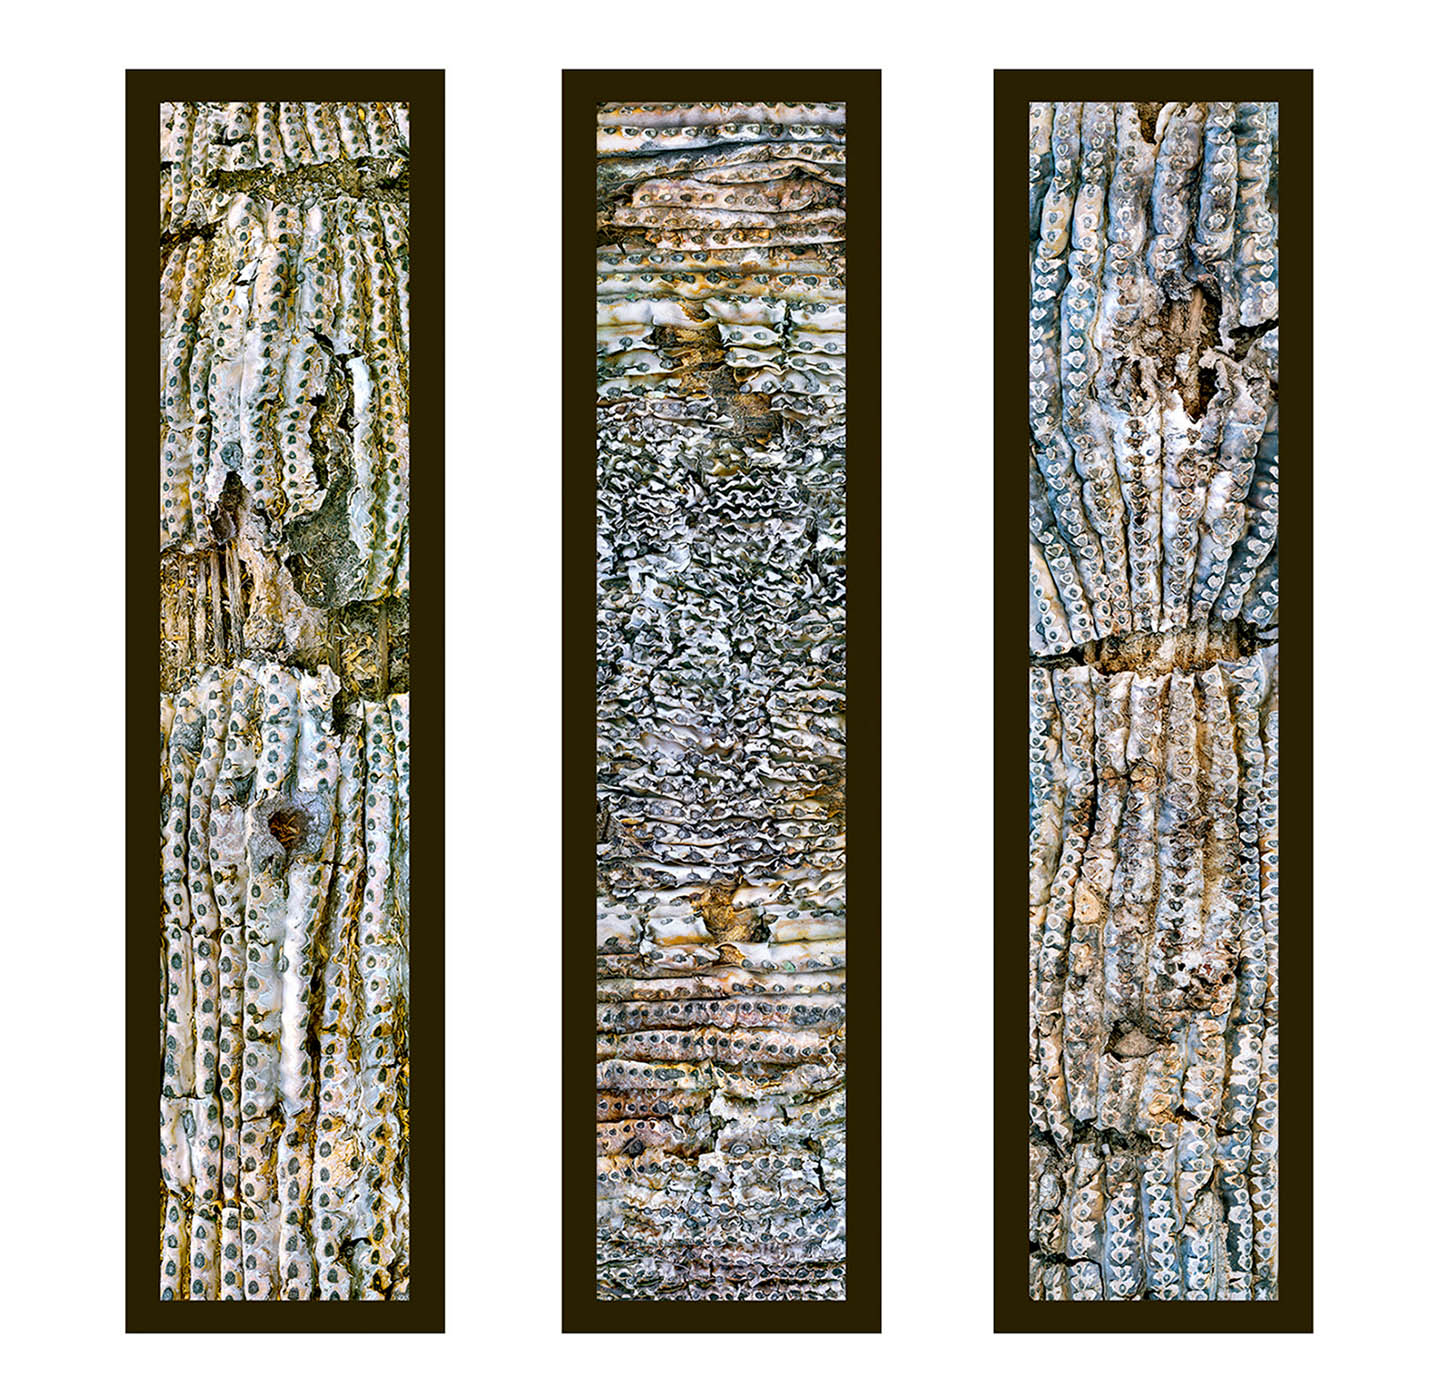 Saguaro Skin Triptych, first version, color